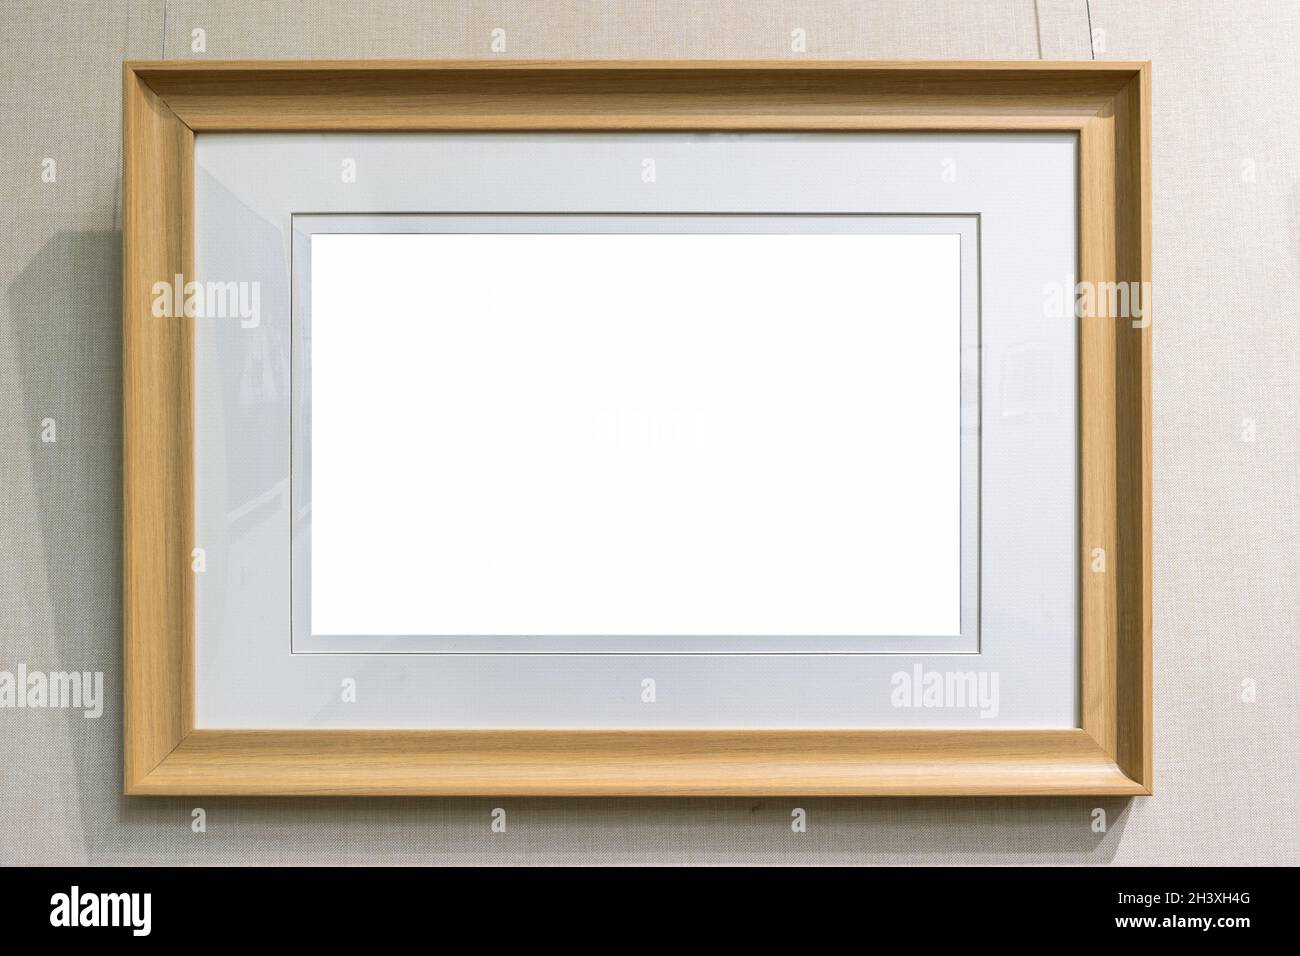 Blank modern wooden picture frame Stock Photo